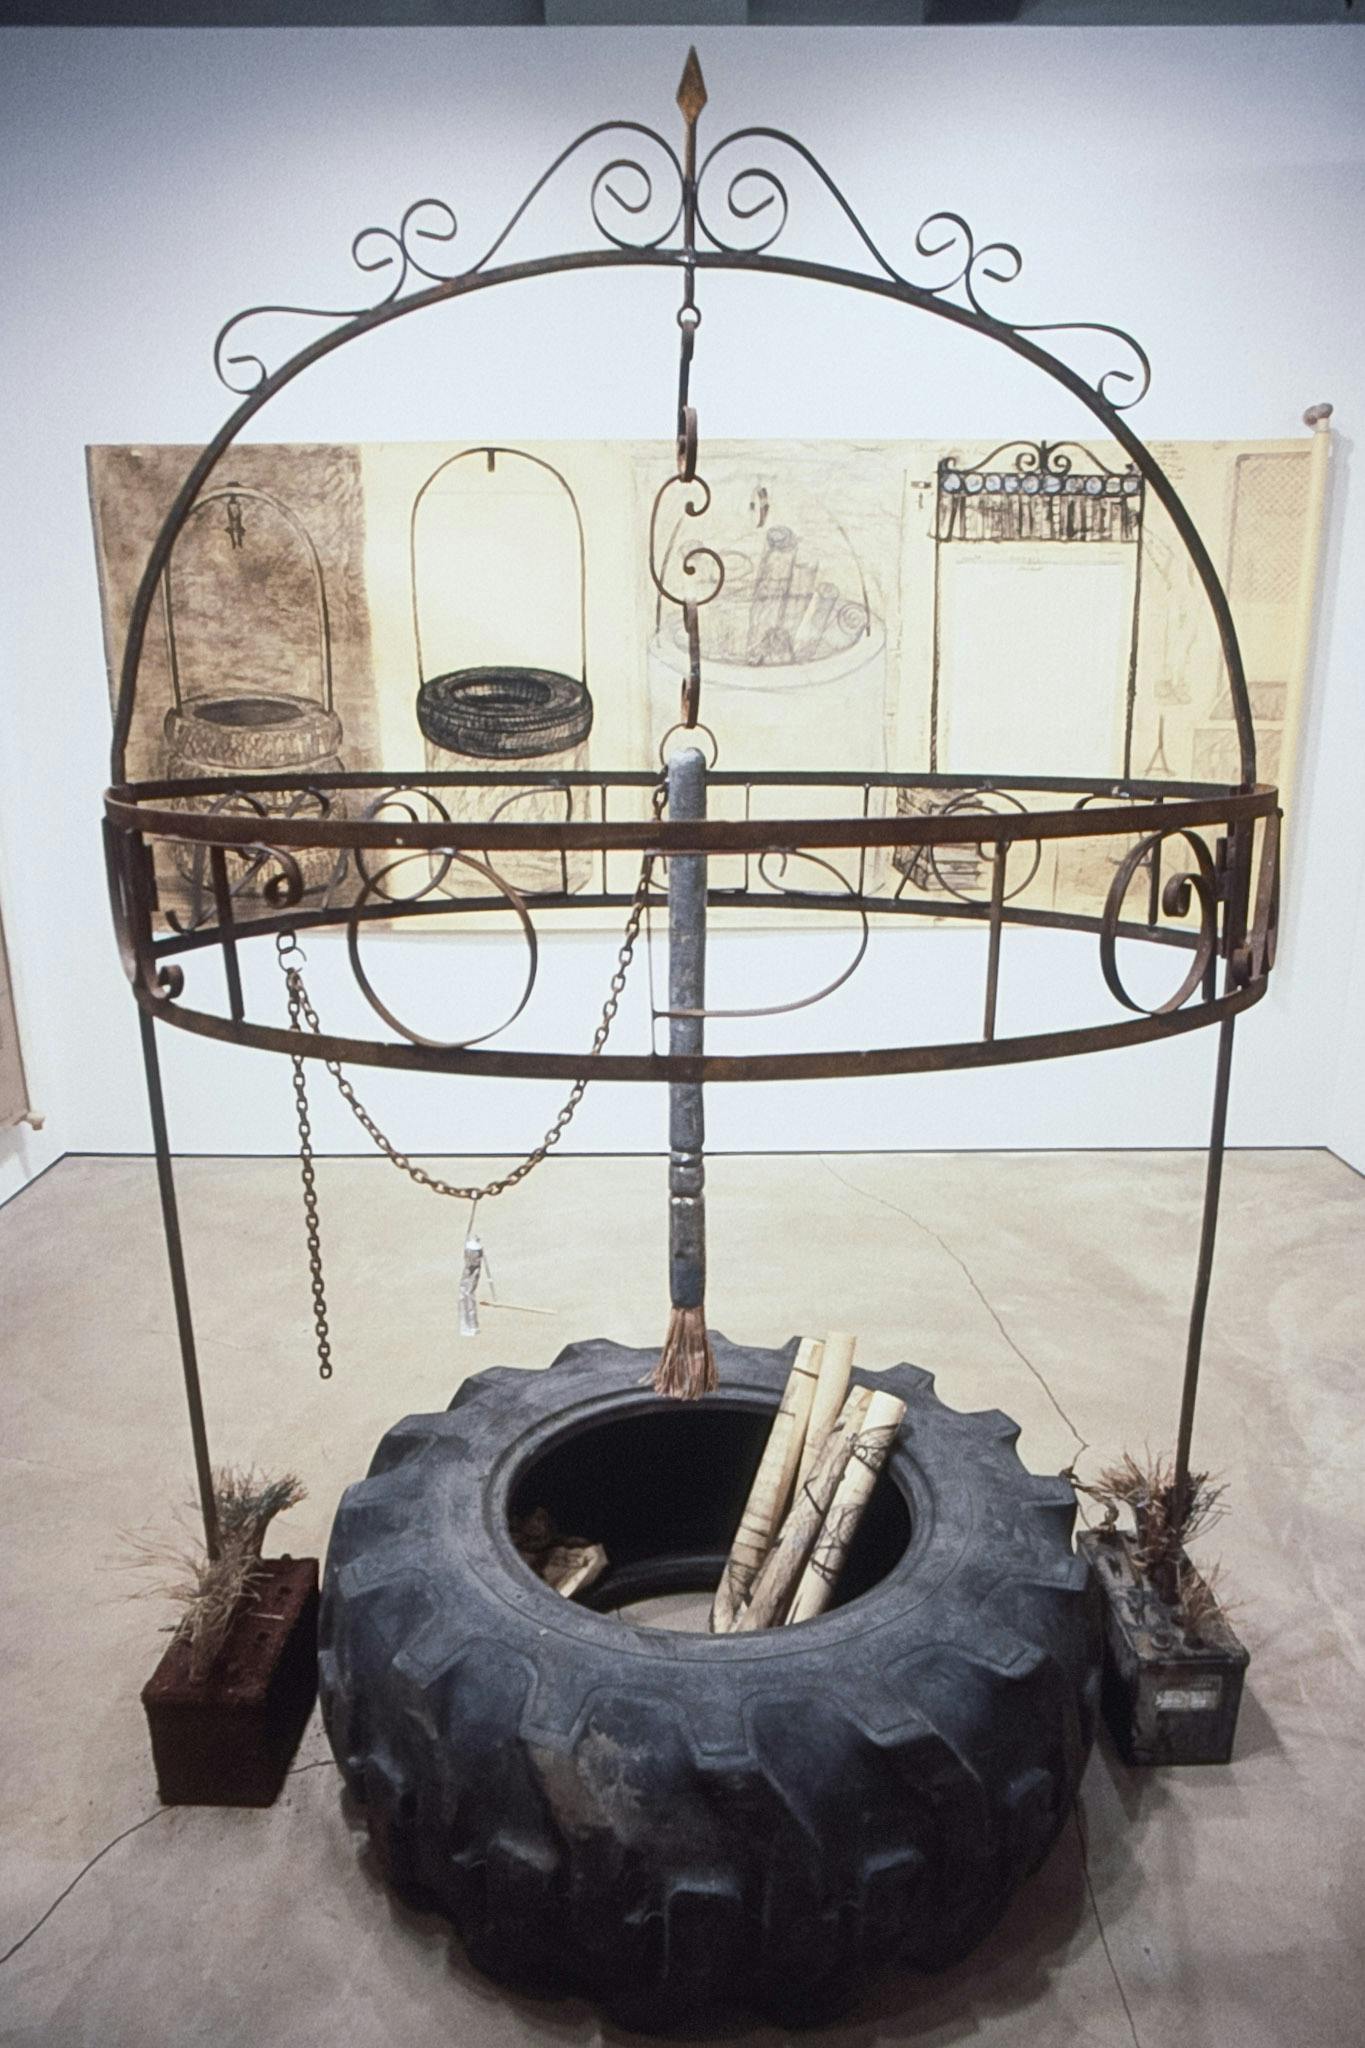 A sculpture on the floor consists of a metal gazebo, a car tire, and a large painting brush. A large black and white drawing in its back shows the design process of this architectural sculpture. 